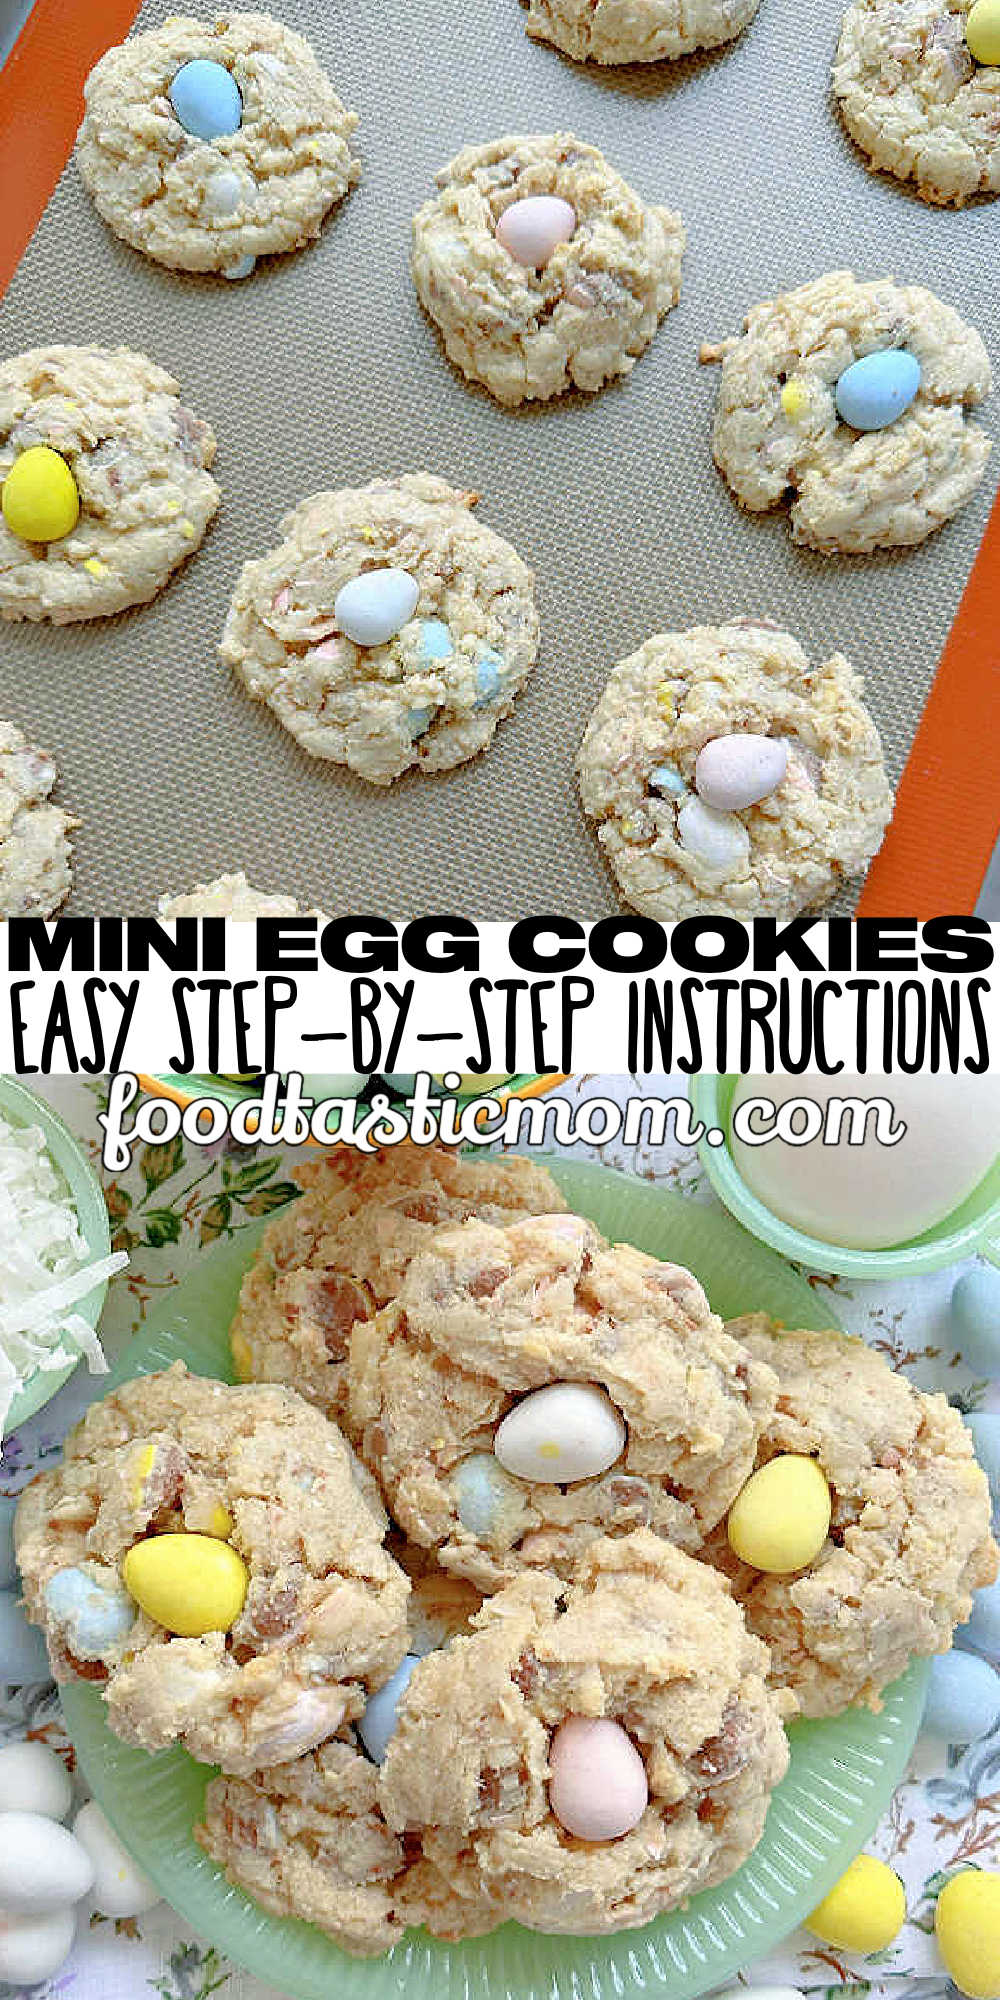 Mini Egg Cookies incorporate Cadbury mini egg chocolate candy and coconut into a deliciously chewy cookie perfect for the Easter season. via @foodtasticmom